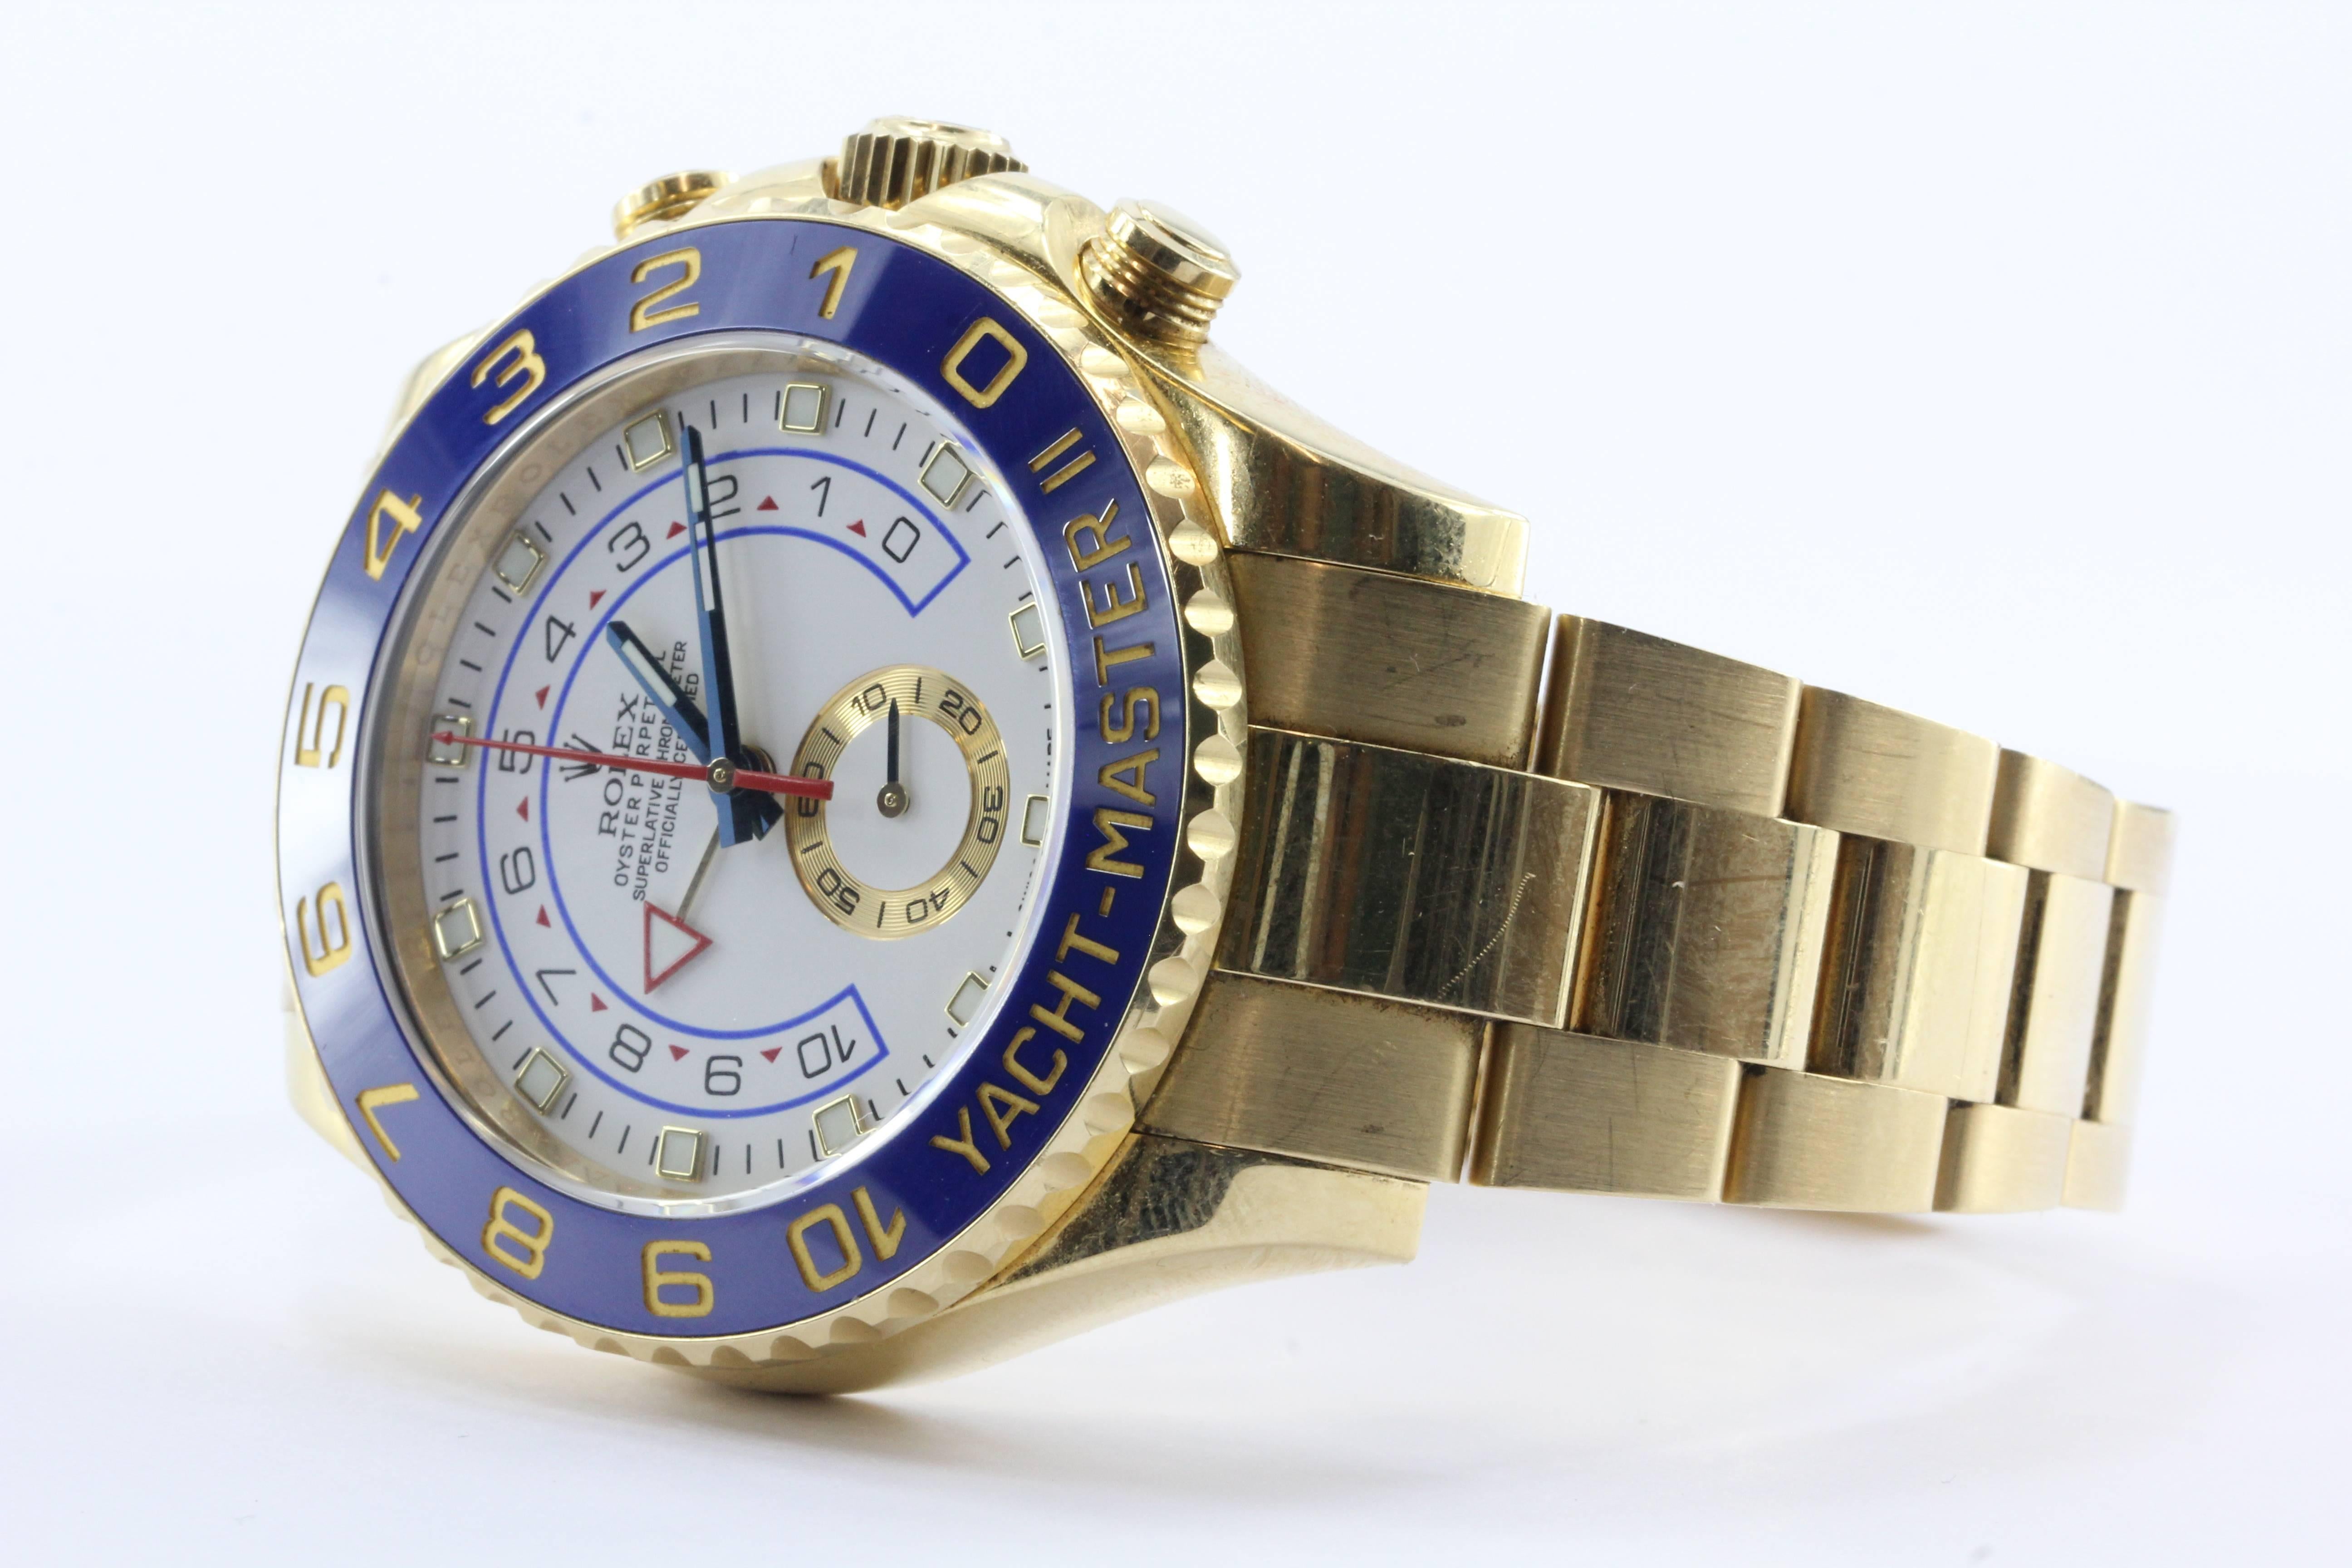 Rolex Yacht Master II 18K Gold Oyster Automatic Men's White Dial Watch 116688WAO. The watch is in excellent used estate condition, running great and ready to wear. It comes with its original box but no paperwork. It does come with a Jewelry Judge